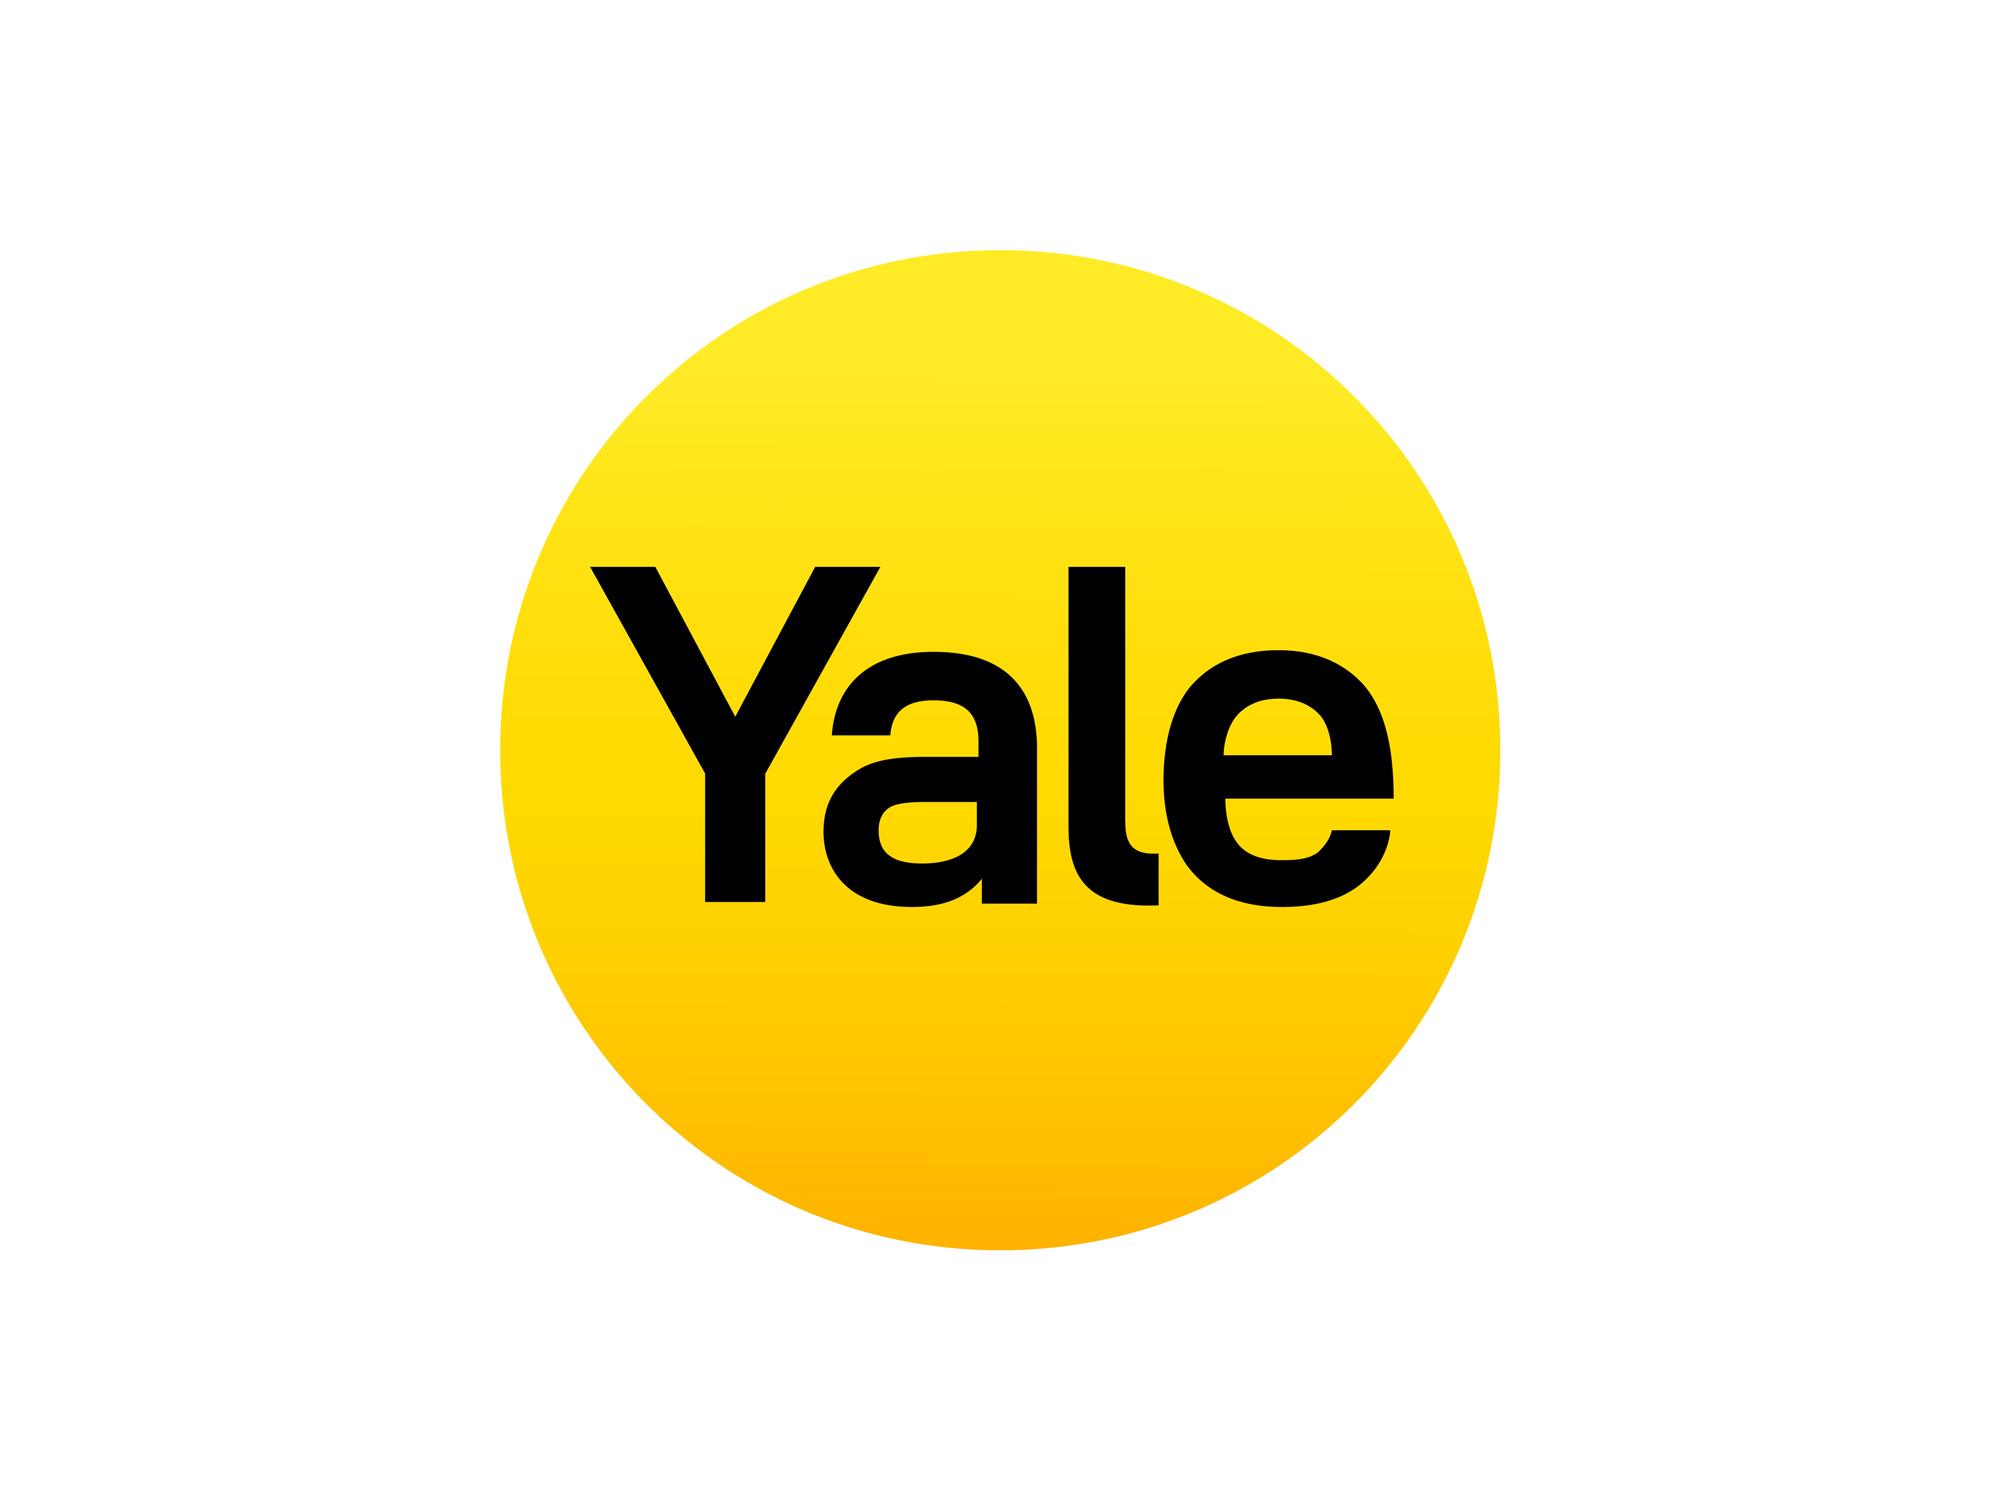 New Logo and Identity for Yale by GW+Co